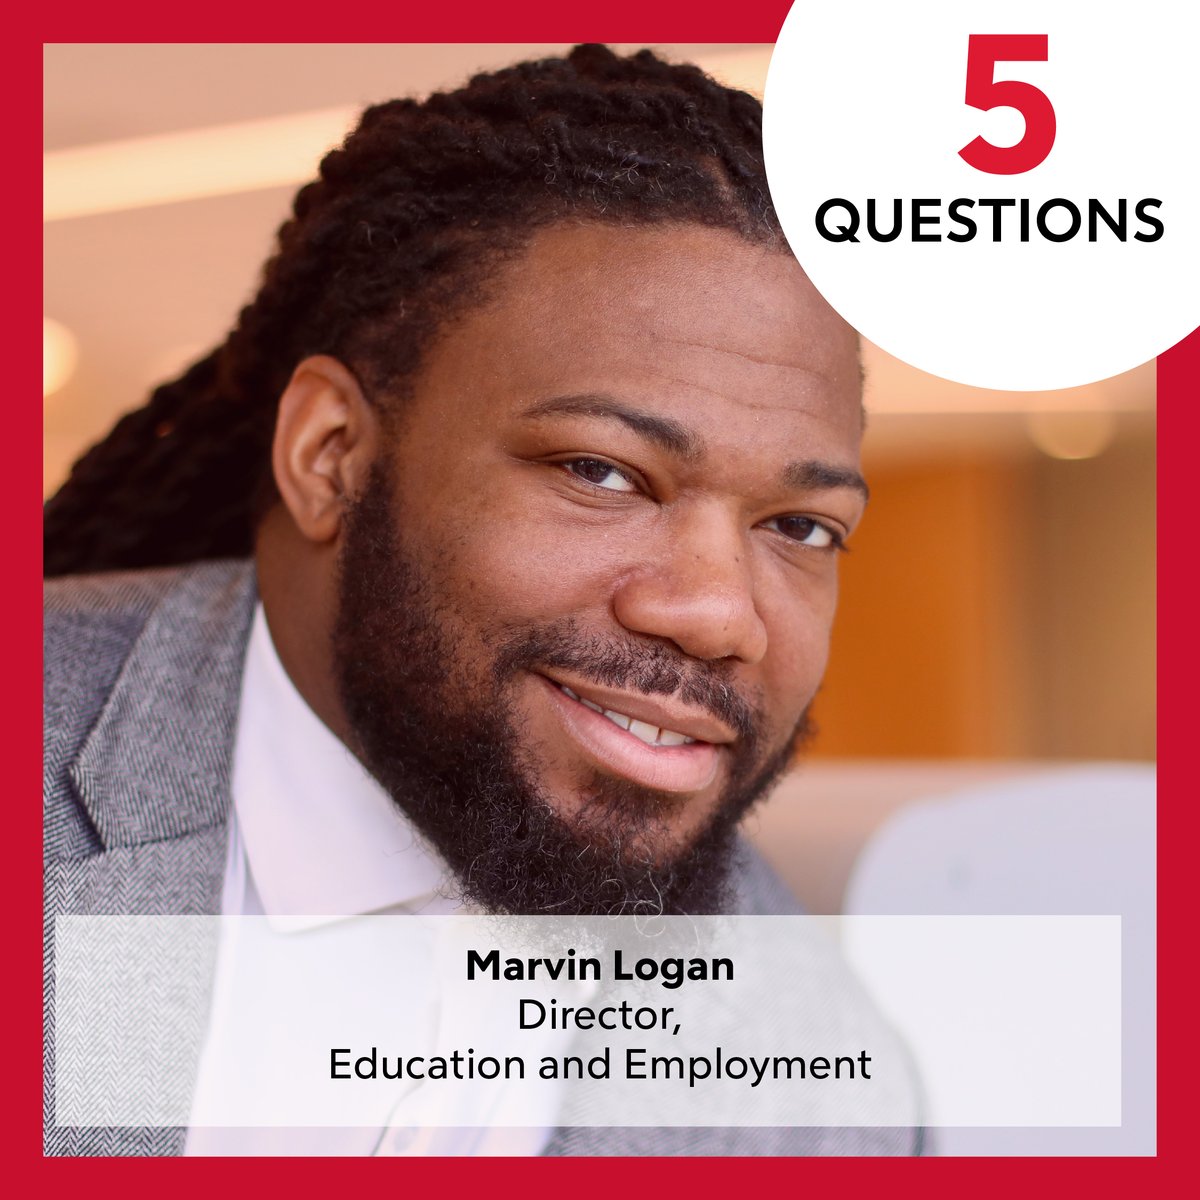 In this edition of 5 Questions, we sat down with Marvin Logan to learn more about his vision for workforce development and #career education in #Detroit. Check it out: bit.ly/49pIFY4 #leadership #philanthropy